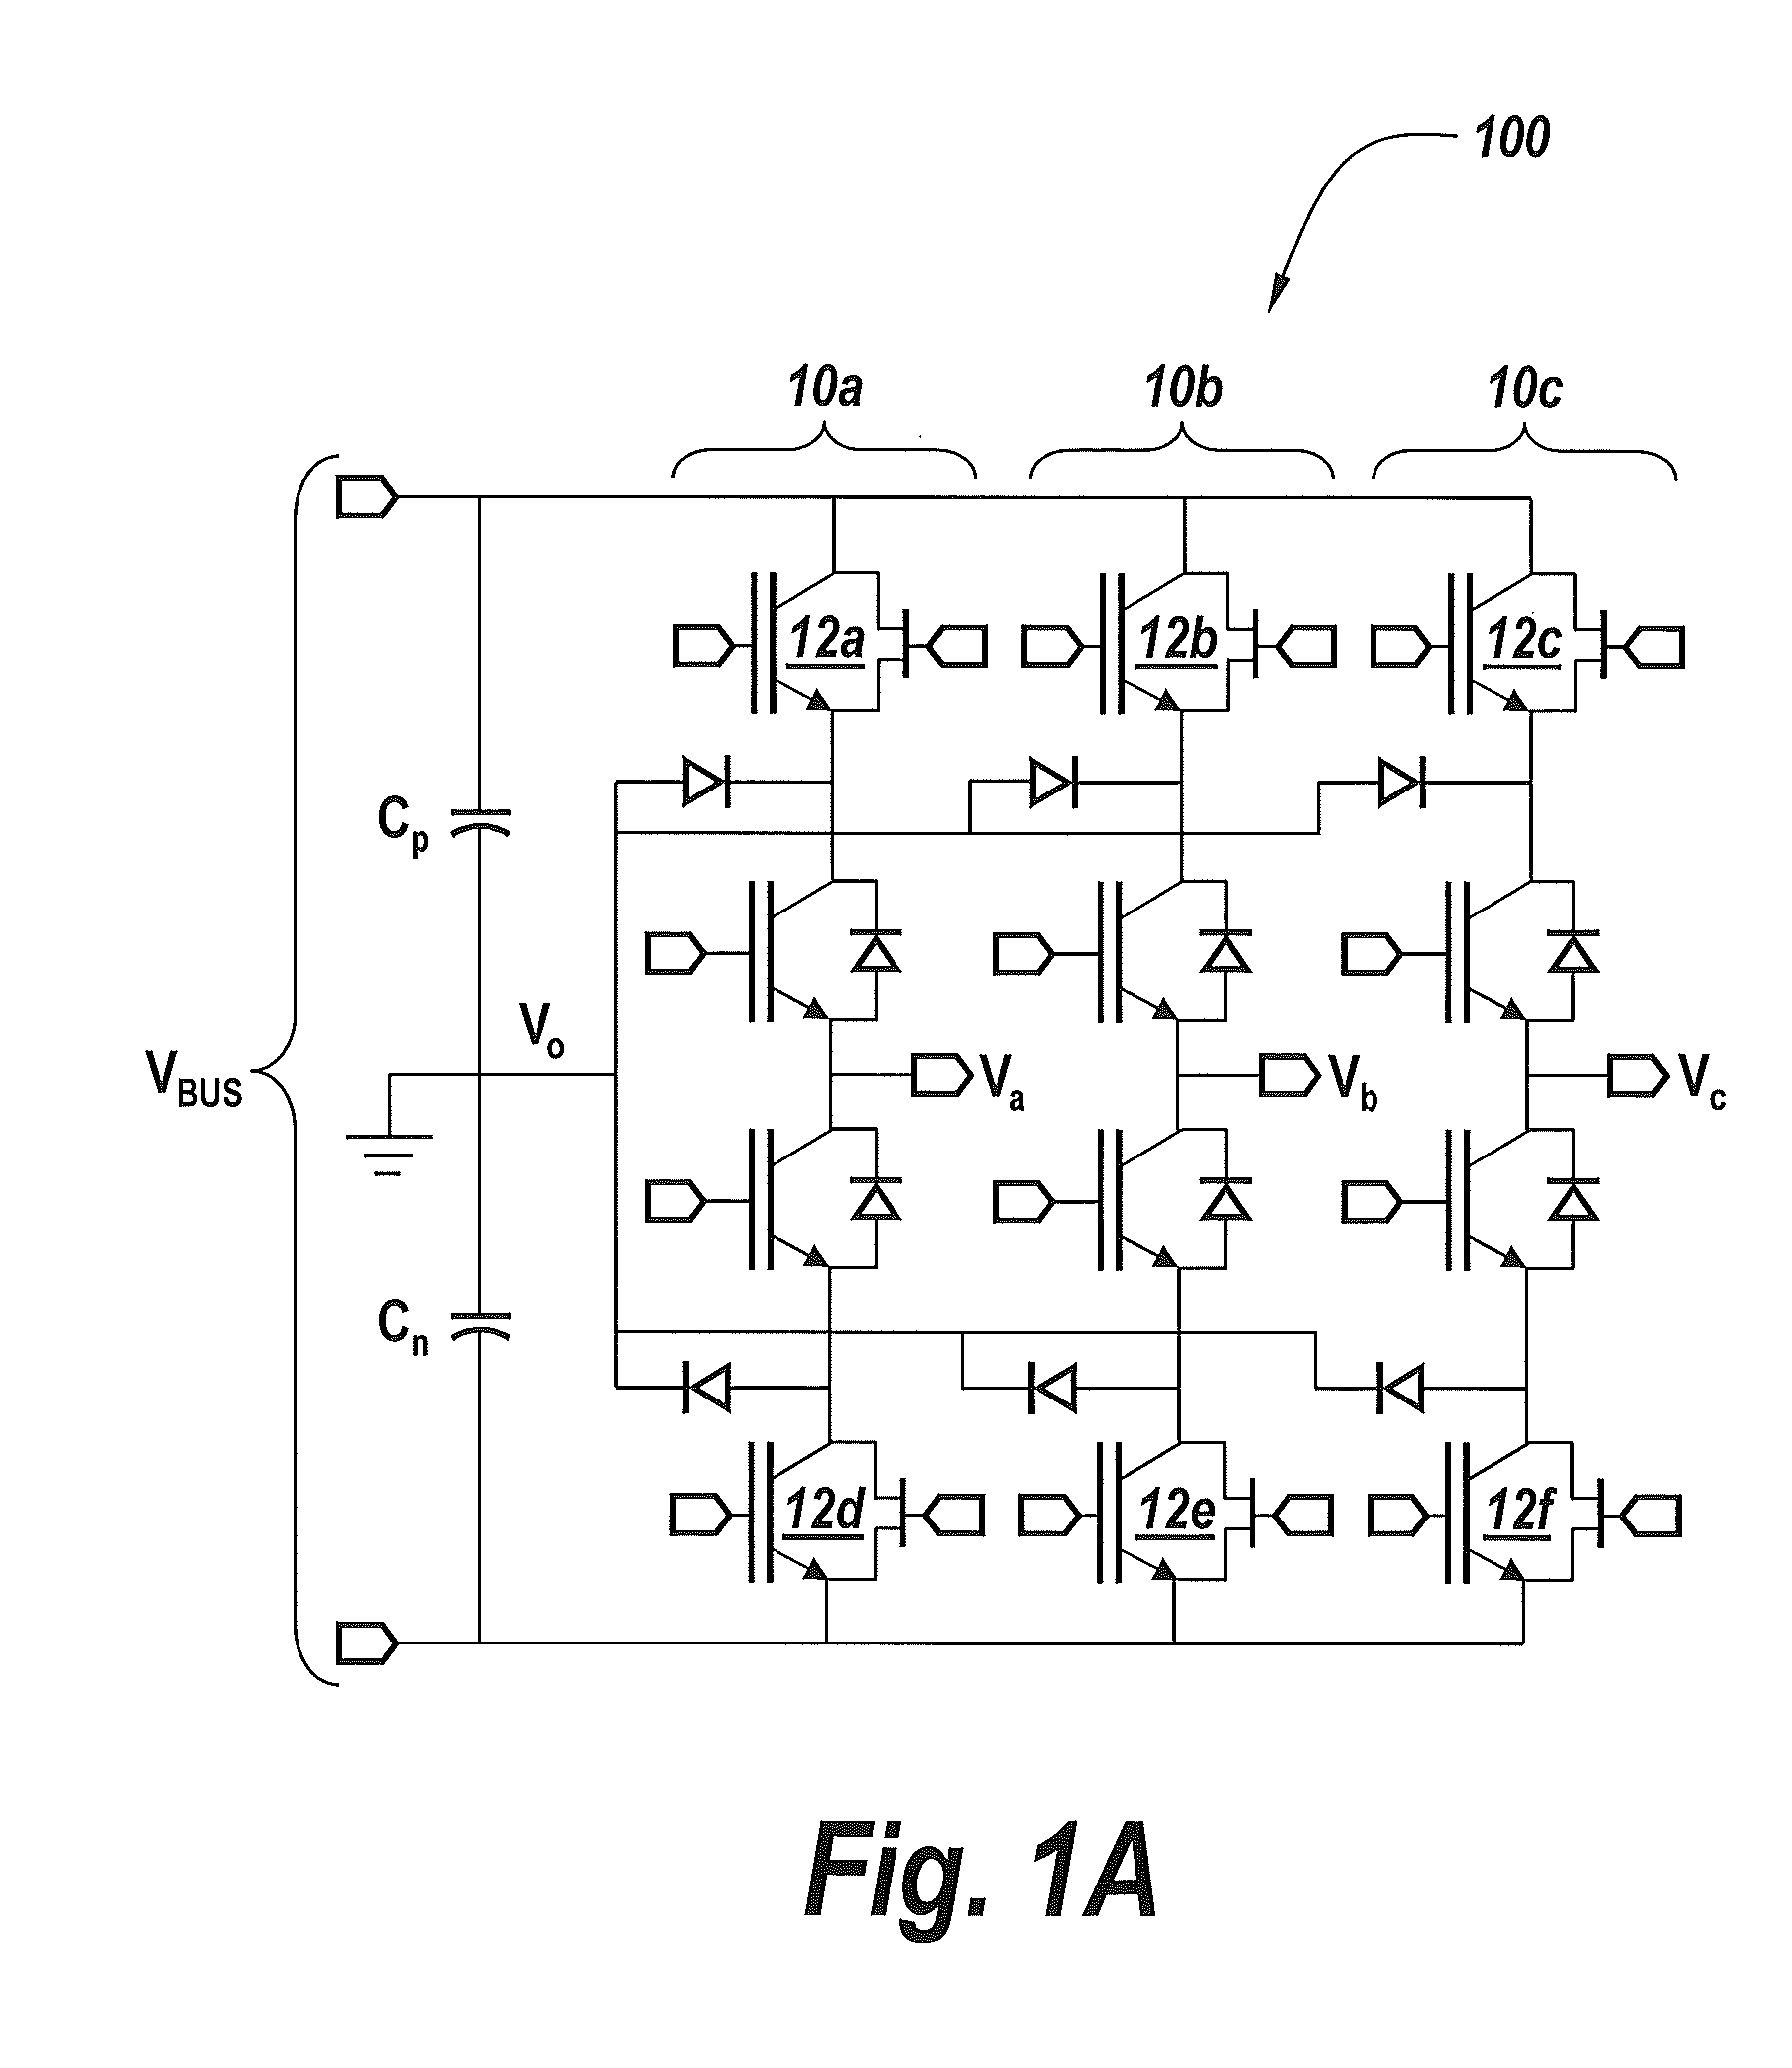 Hybrid power devices and switching circuits for high power load sourcing applications